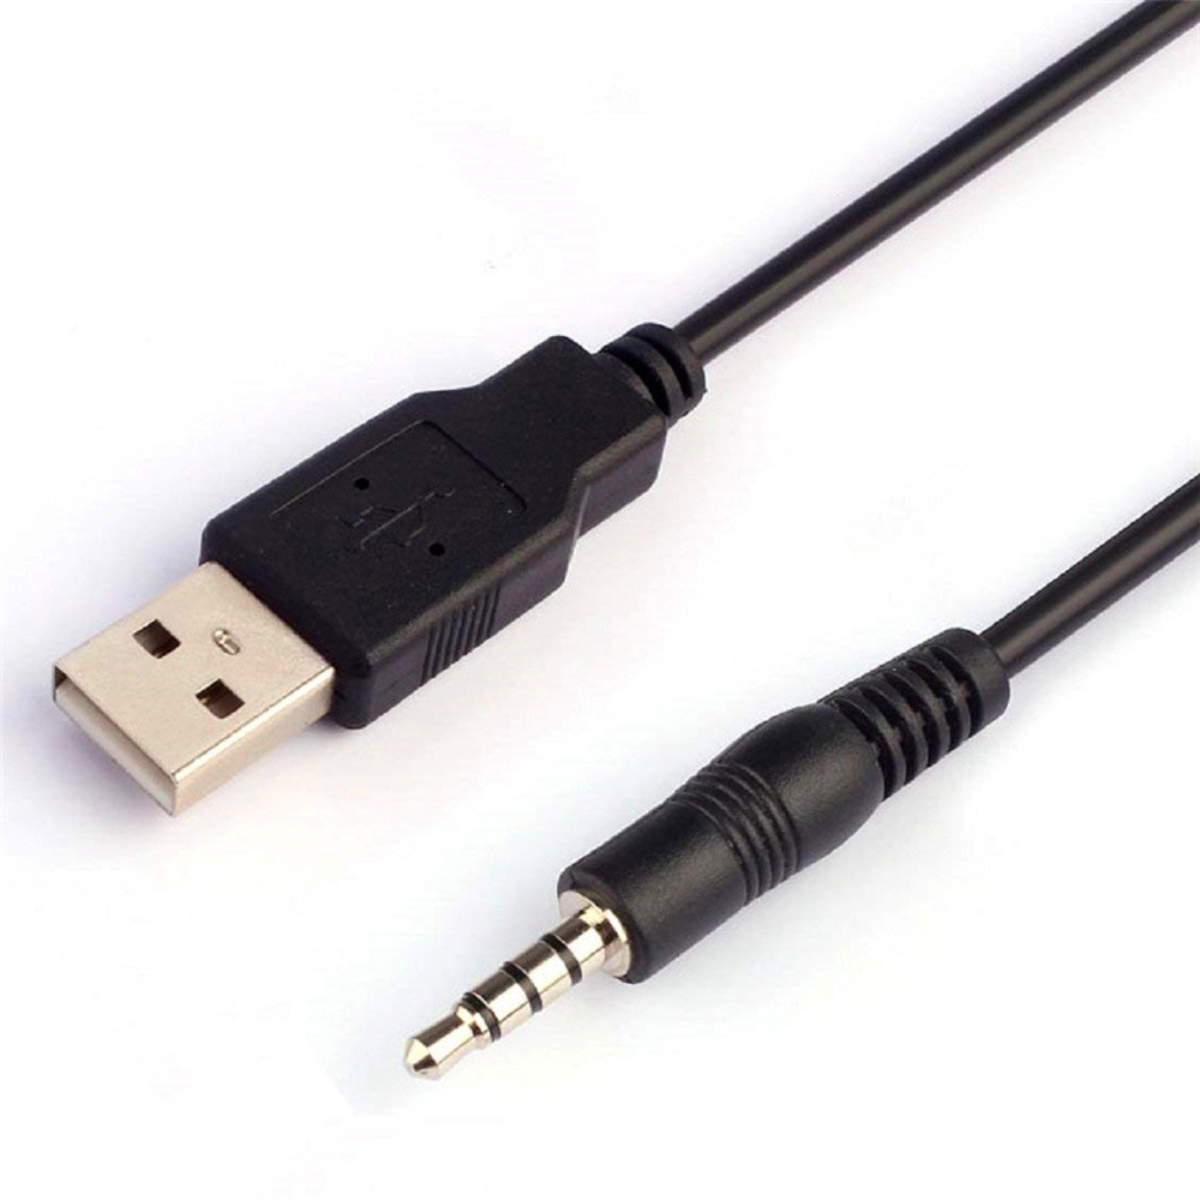 14-amazing-3-5mm-male-aux-audio-jack-to-usb-2-0-male-charge-cable-adapter-cord-for-2023